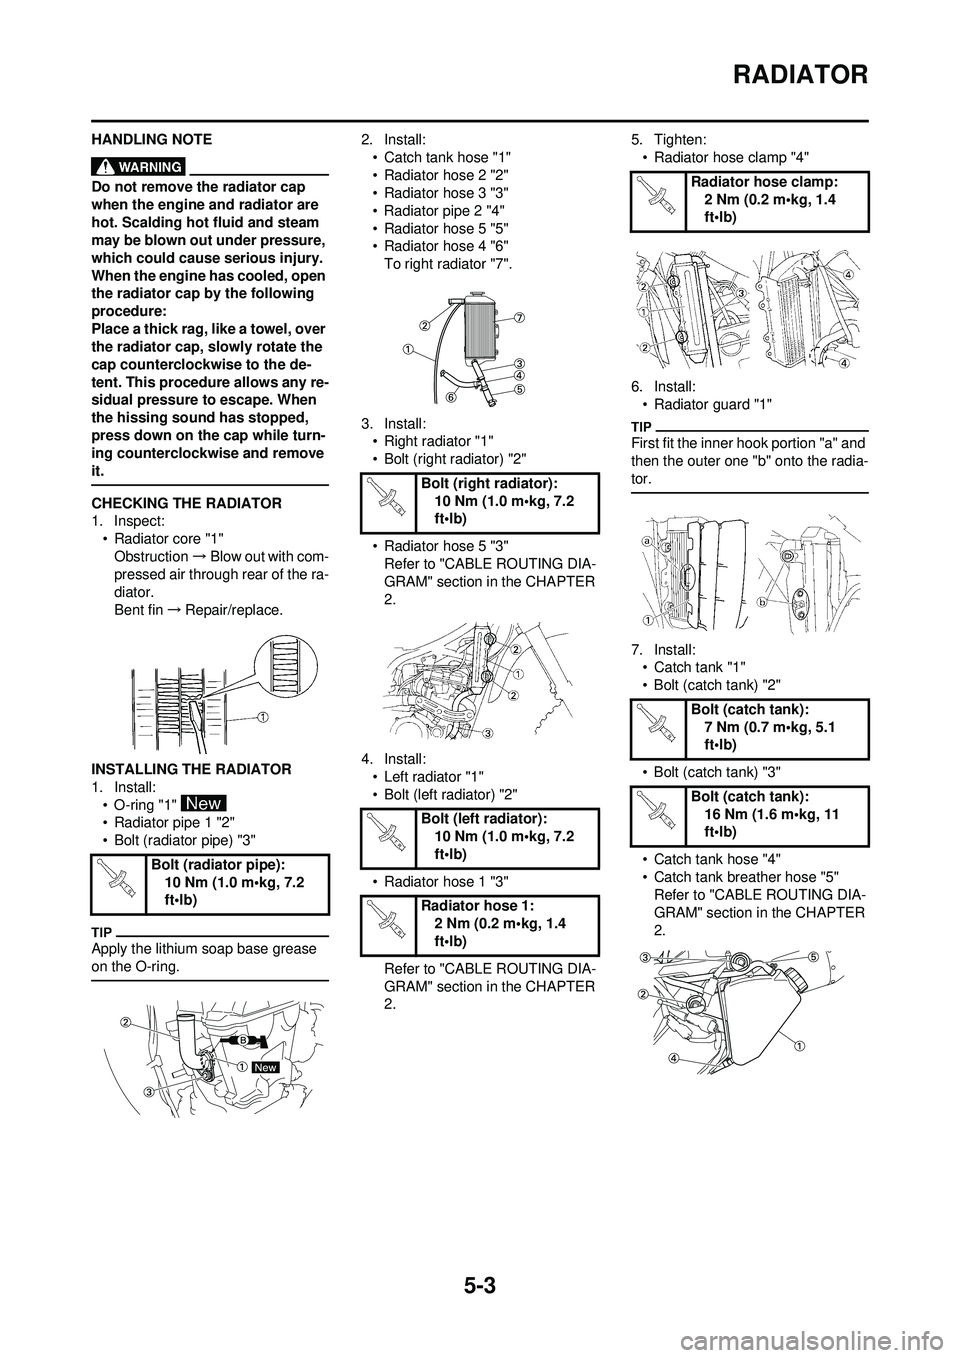 YAMAHA WR 250F 2009  Owners Manual 5-3
RADIATOR
HANDLING NOTE
Do not remove the radiator cap 
when the engine and radiator are 
hot. Scalding hot fluid and steam 
may be blown out under pressure, 
which could cause serious injury. 
Whe